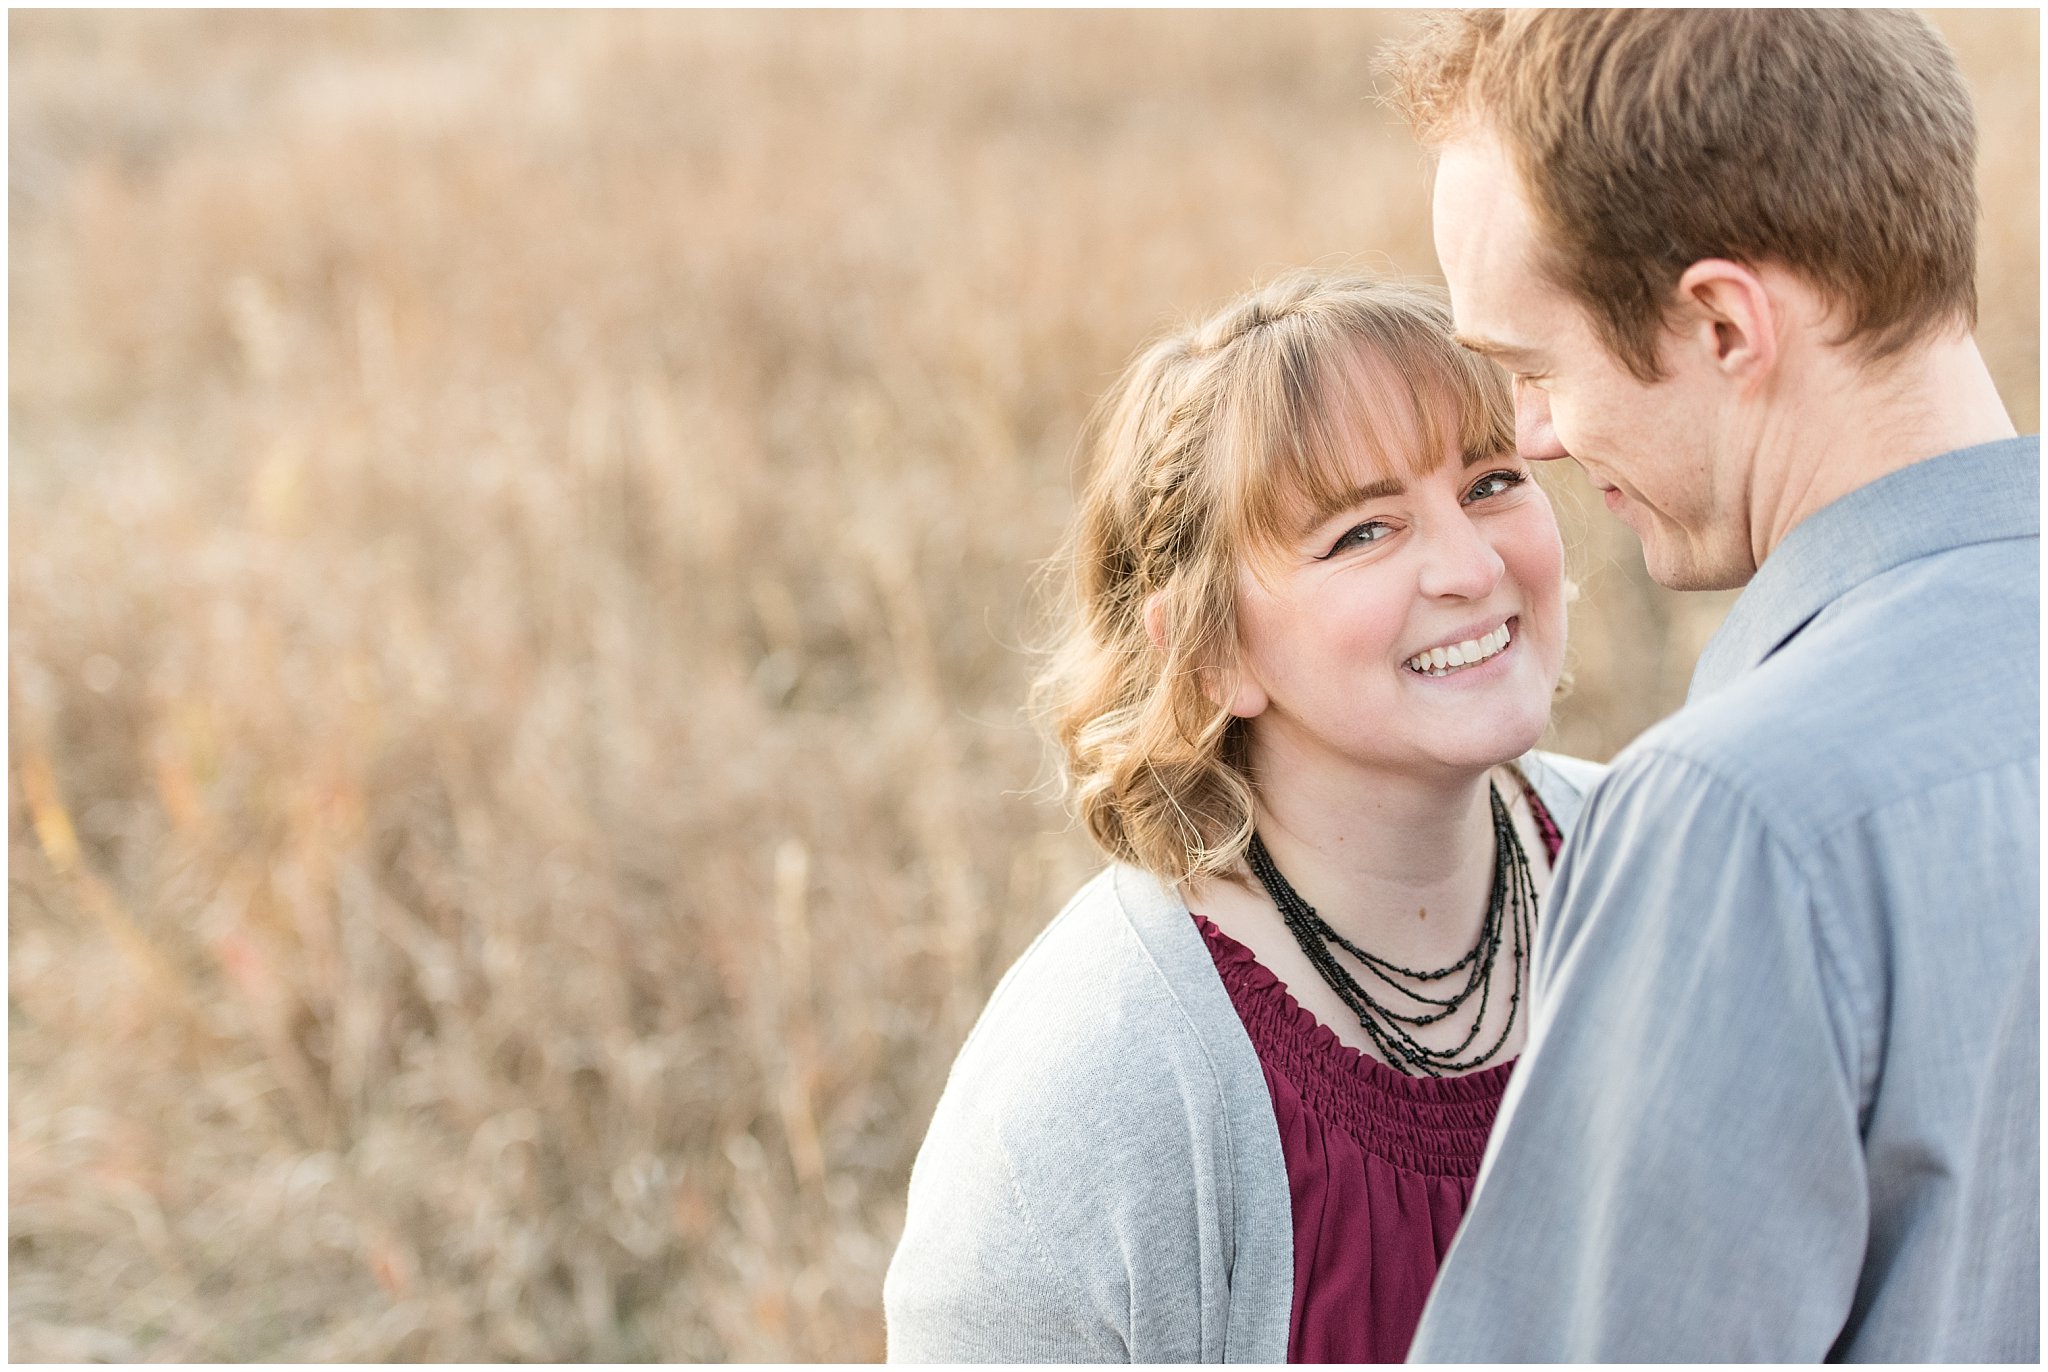 Girl smiling at the camera during field engagements | Davis County Fall Engagement | Utah Wedding Photographers | Jessie and Dallin